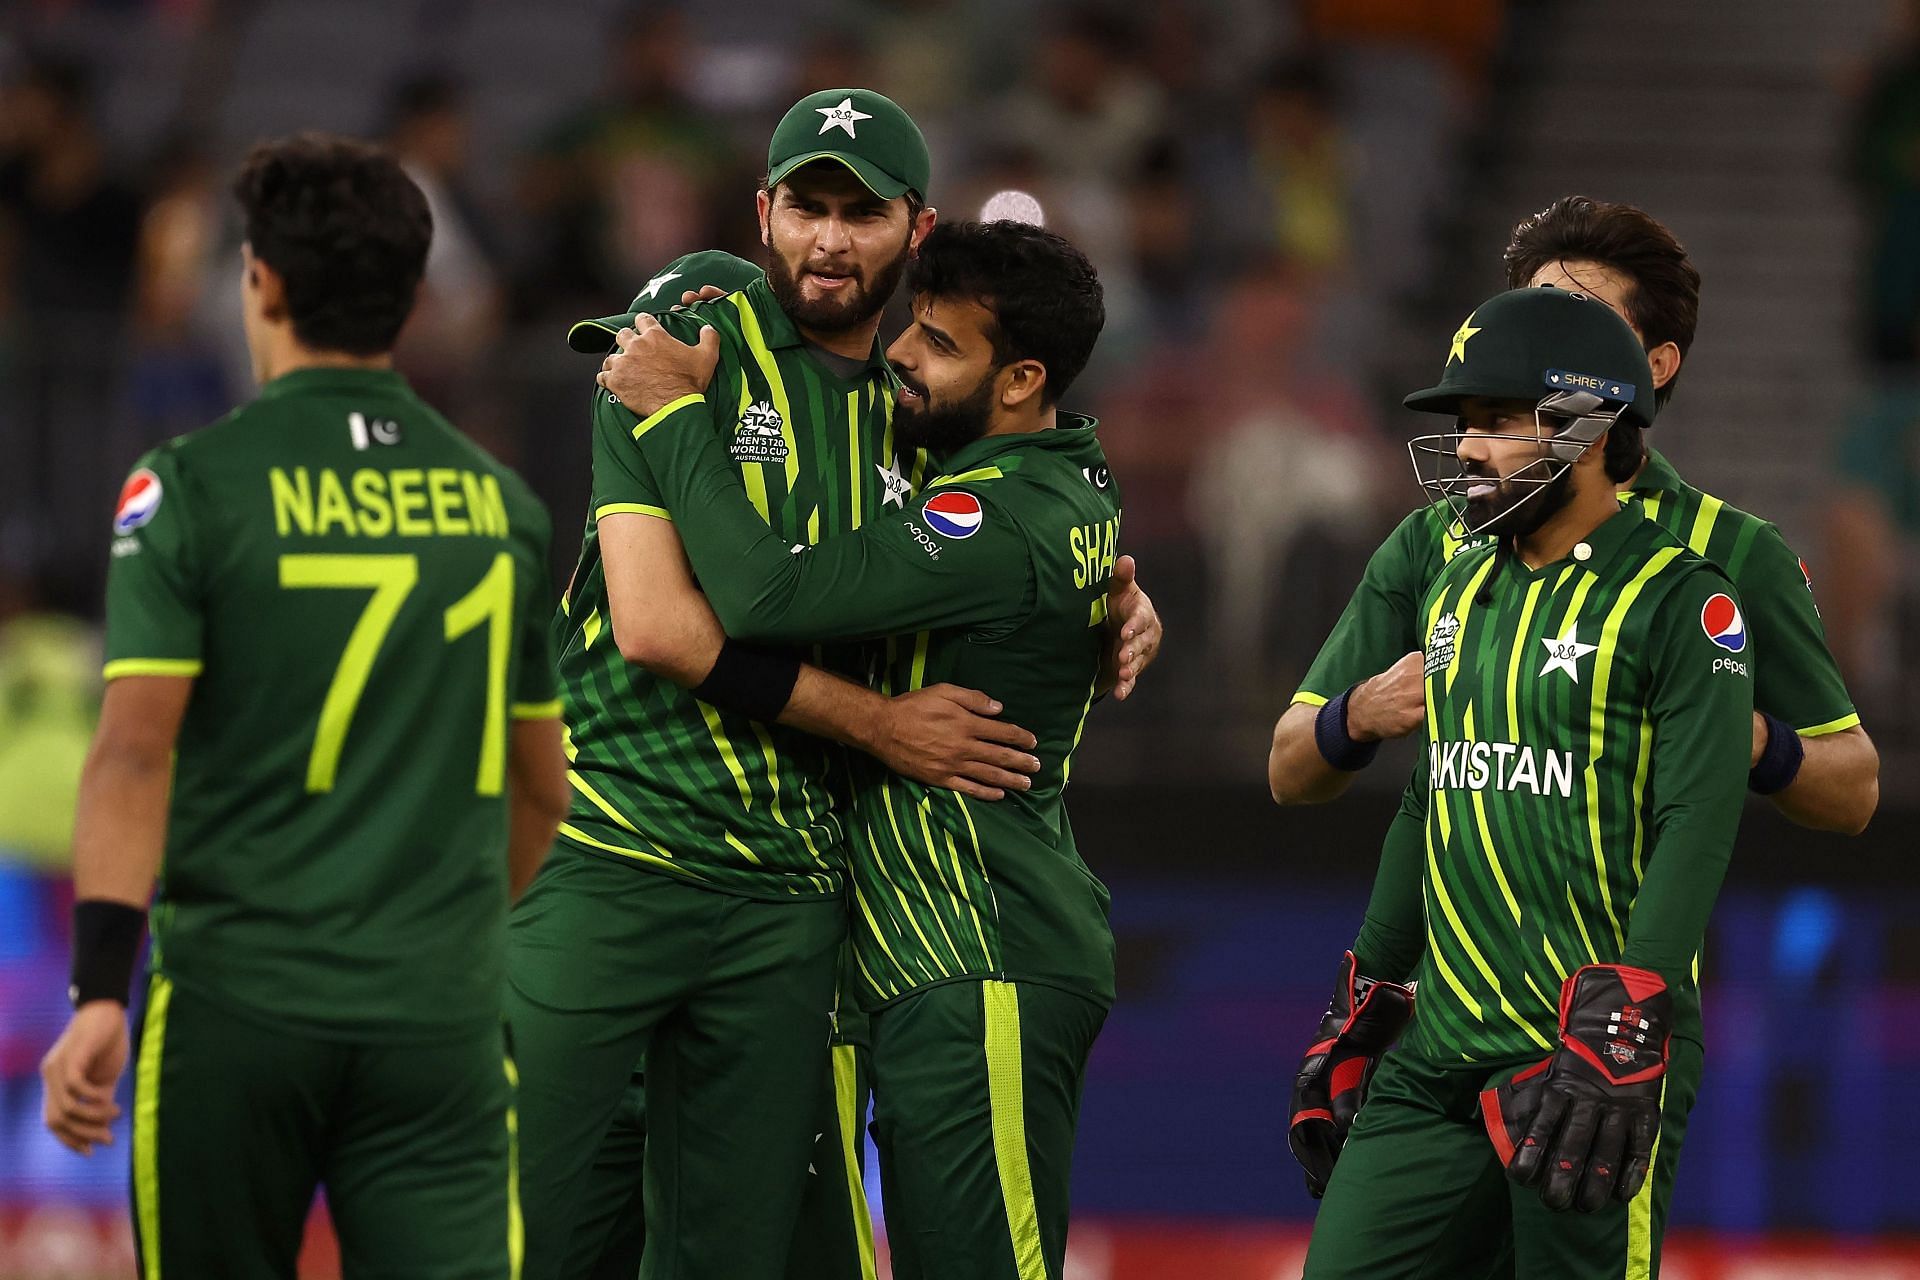 Pakistan vs South Africa T20 World Cup Probable XIs, pitch report, weather forecast, and live streaming details for Match 36